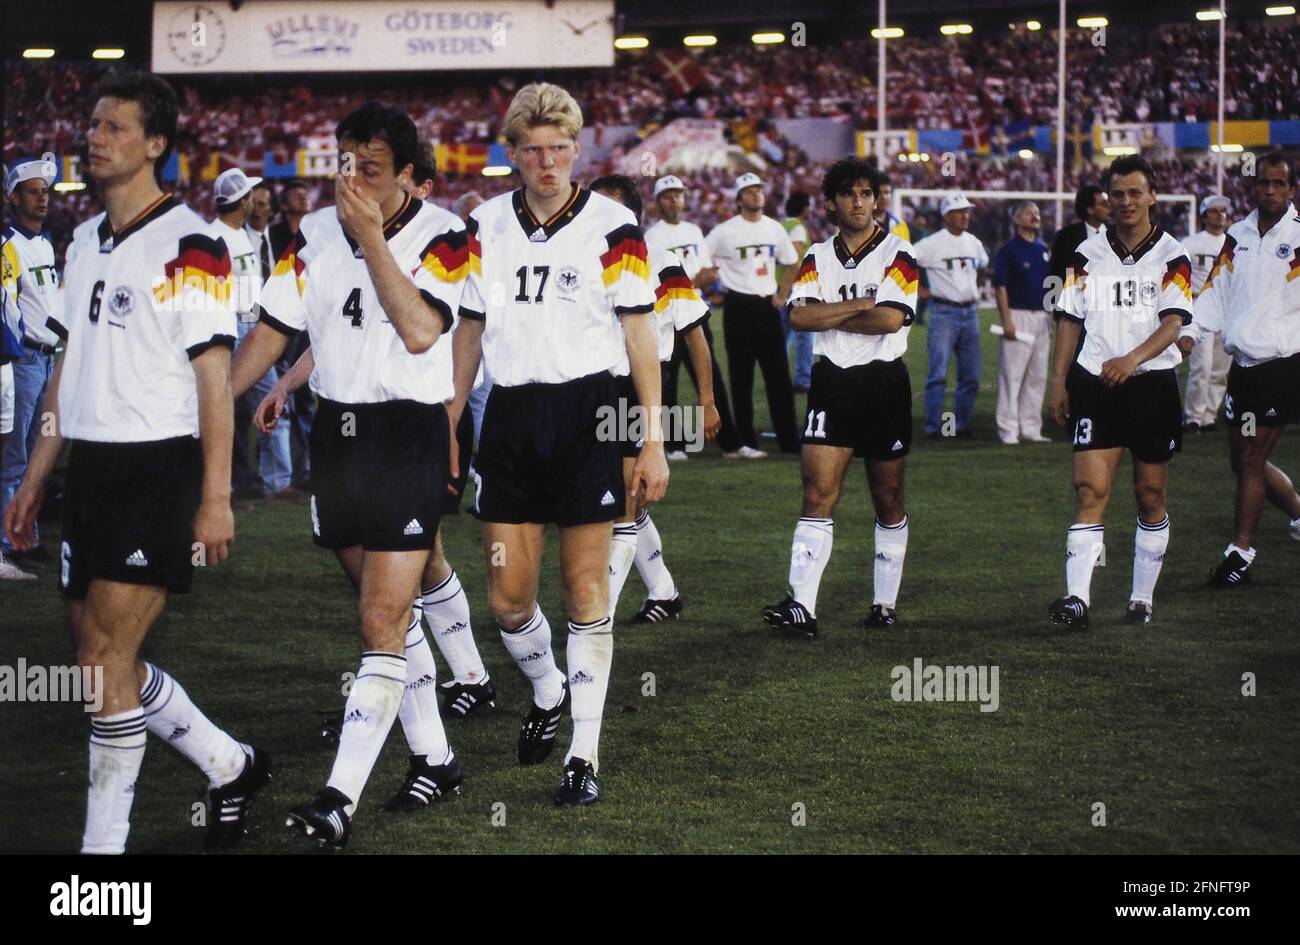 FUSSBALL European Championship 1992 Denmark - Germany Final 26.06.1992 Disappointment Germany: Guido BUCHWALD, Juergen KOHLER, Stefan EFFENBERG, Karl-Heinz RIEDLE, Andreas THOM (flnr all Germany) leave the field disappointed. PHOTO: WEREK Press Photo Agency xxNOxMODELxRELEASExx [automated translation] Stock Photo